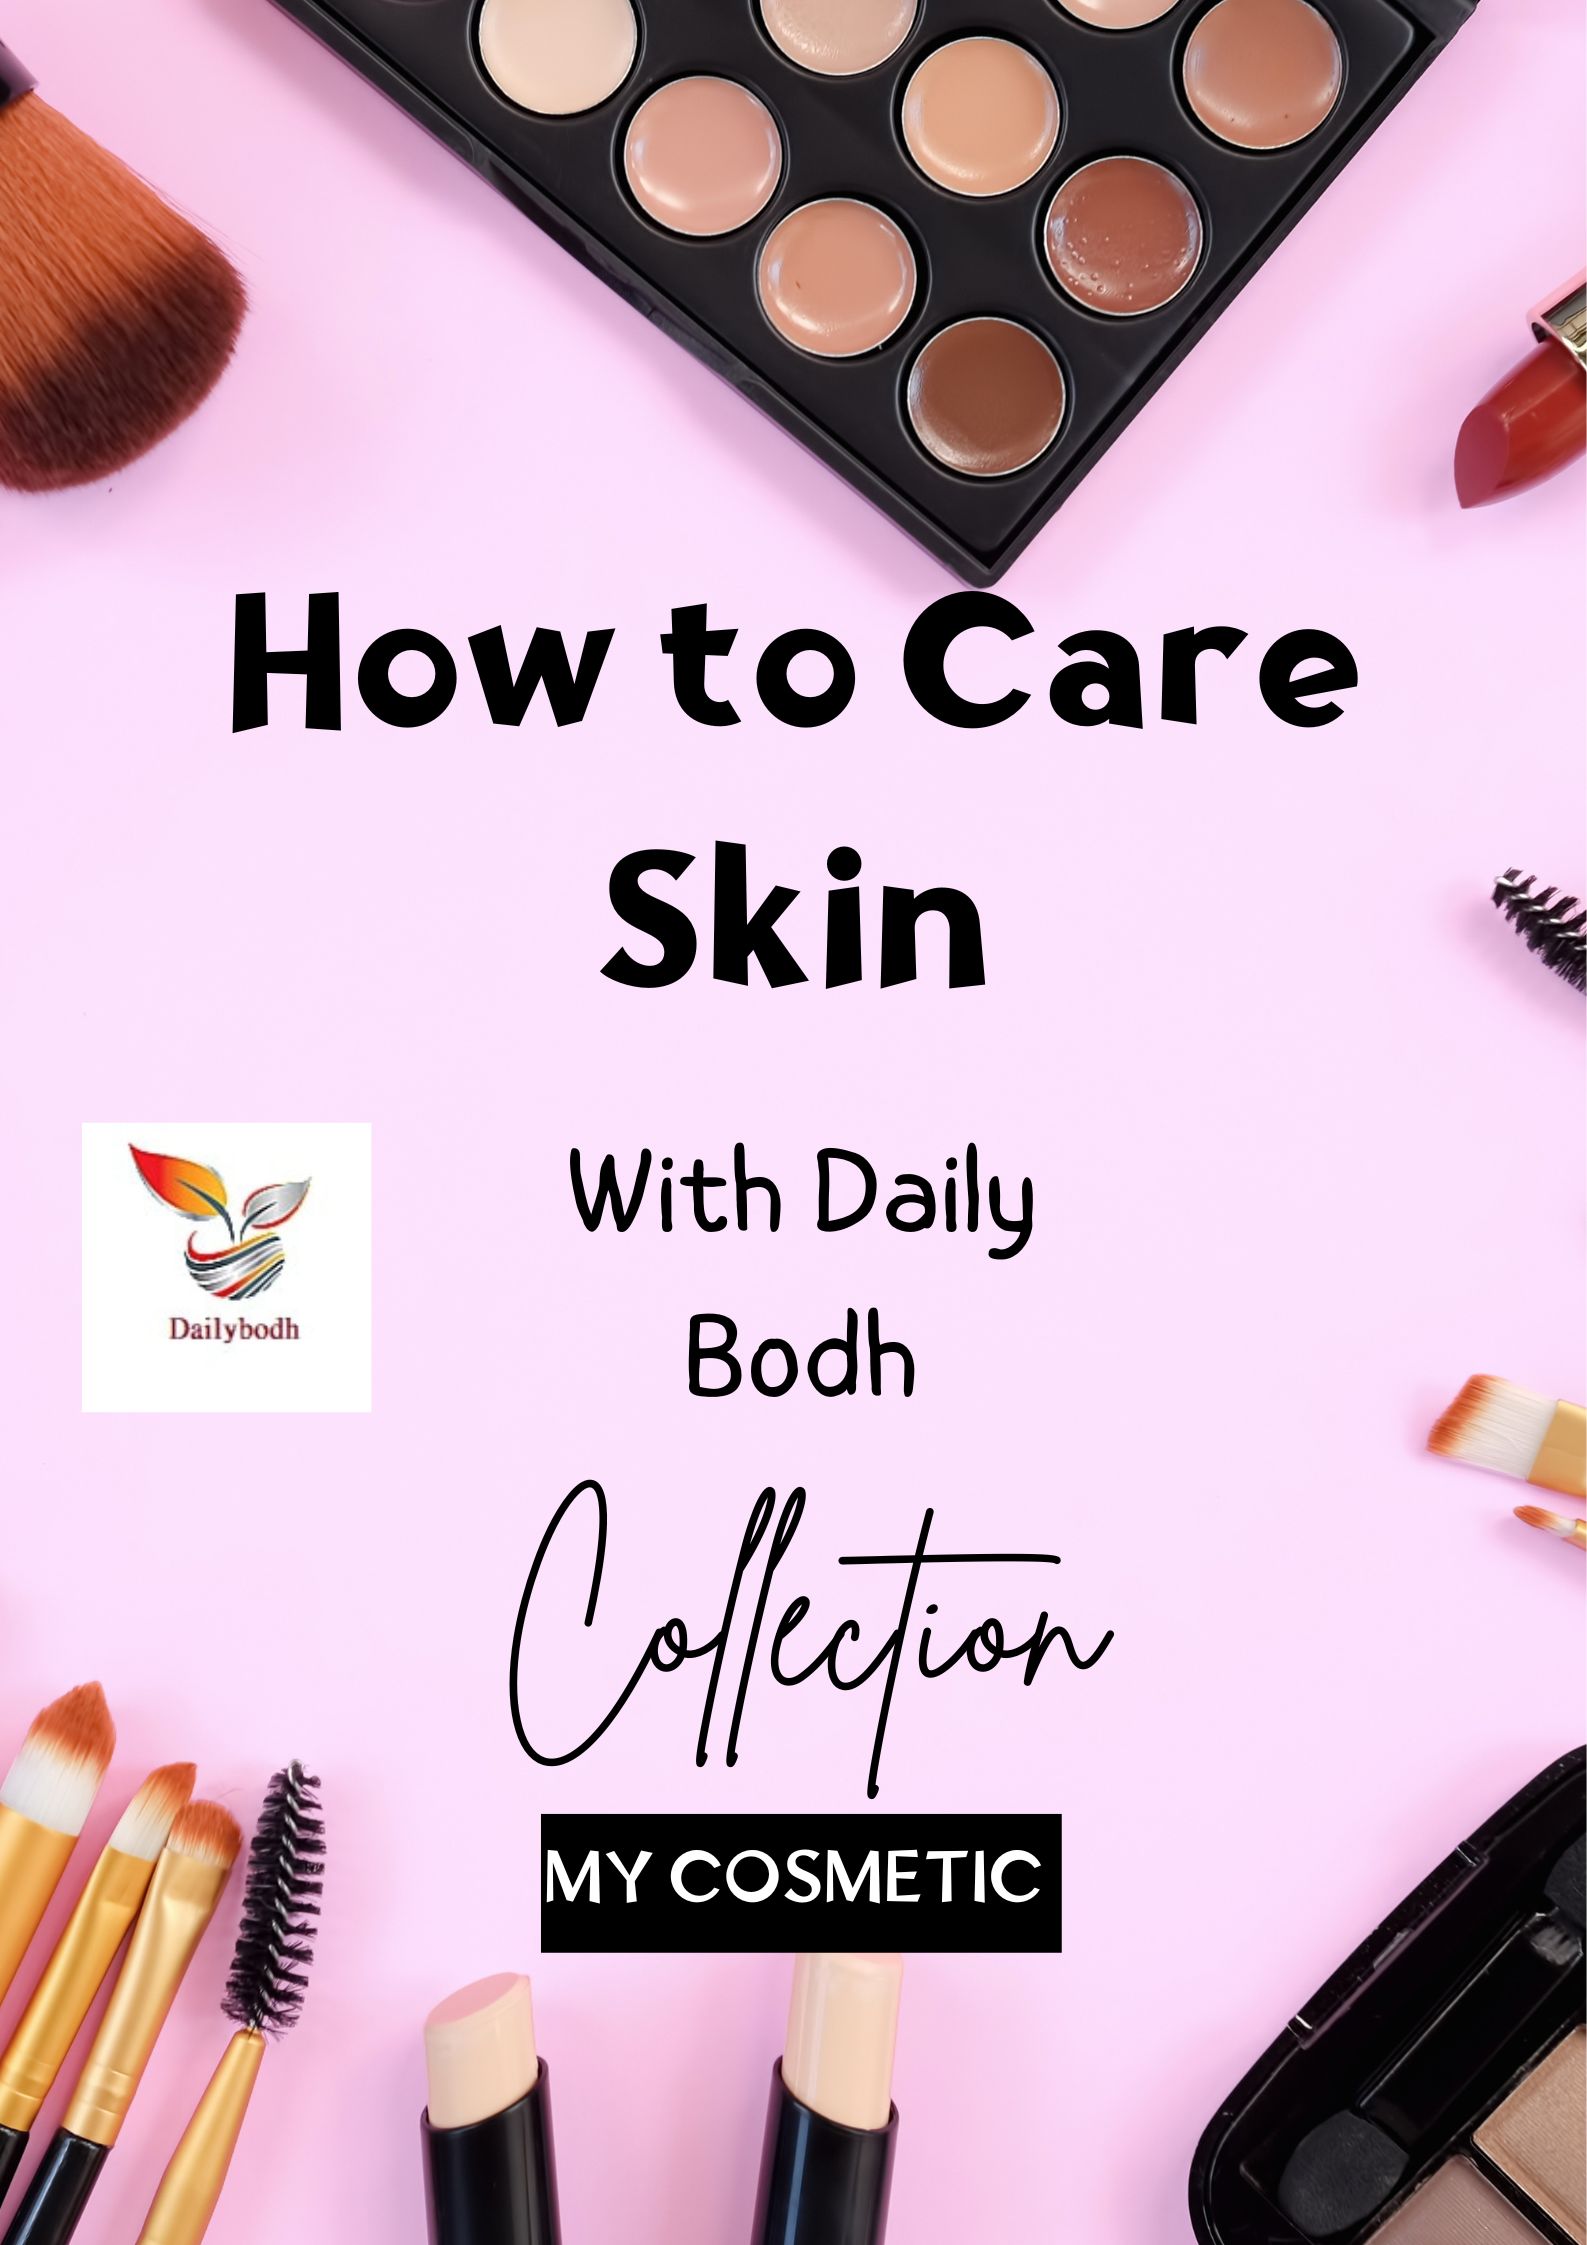 Introduction (How to Care Skin)